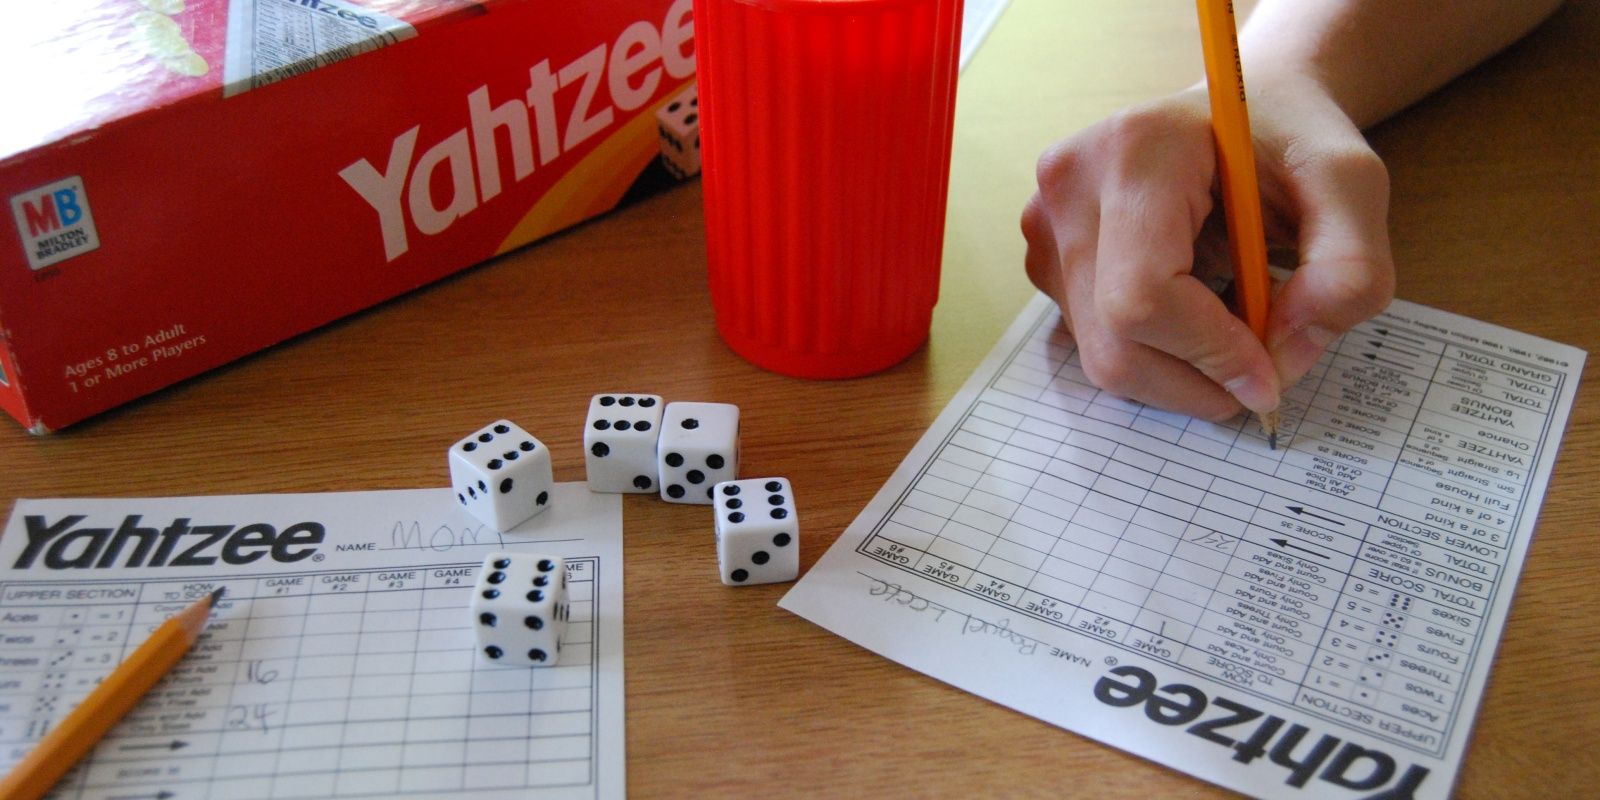 Yahtzee being played on a table